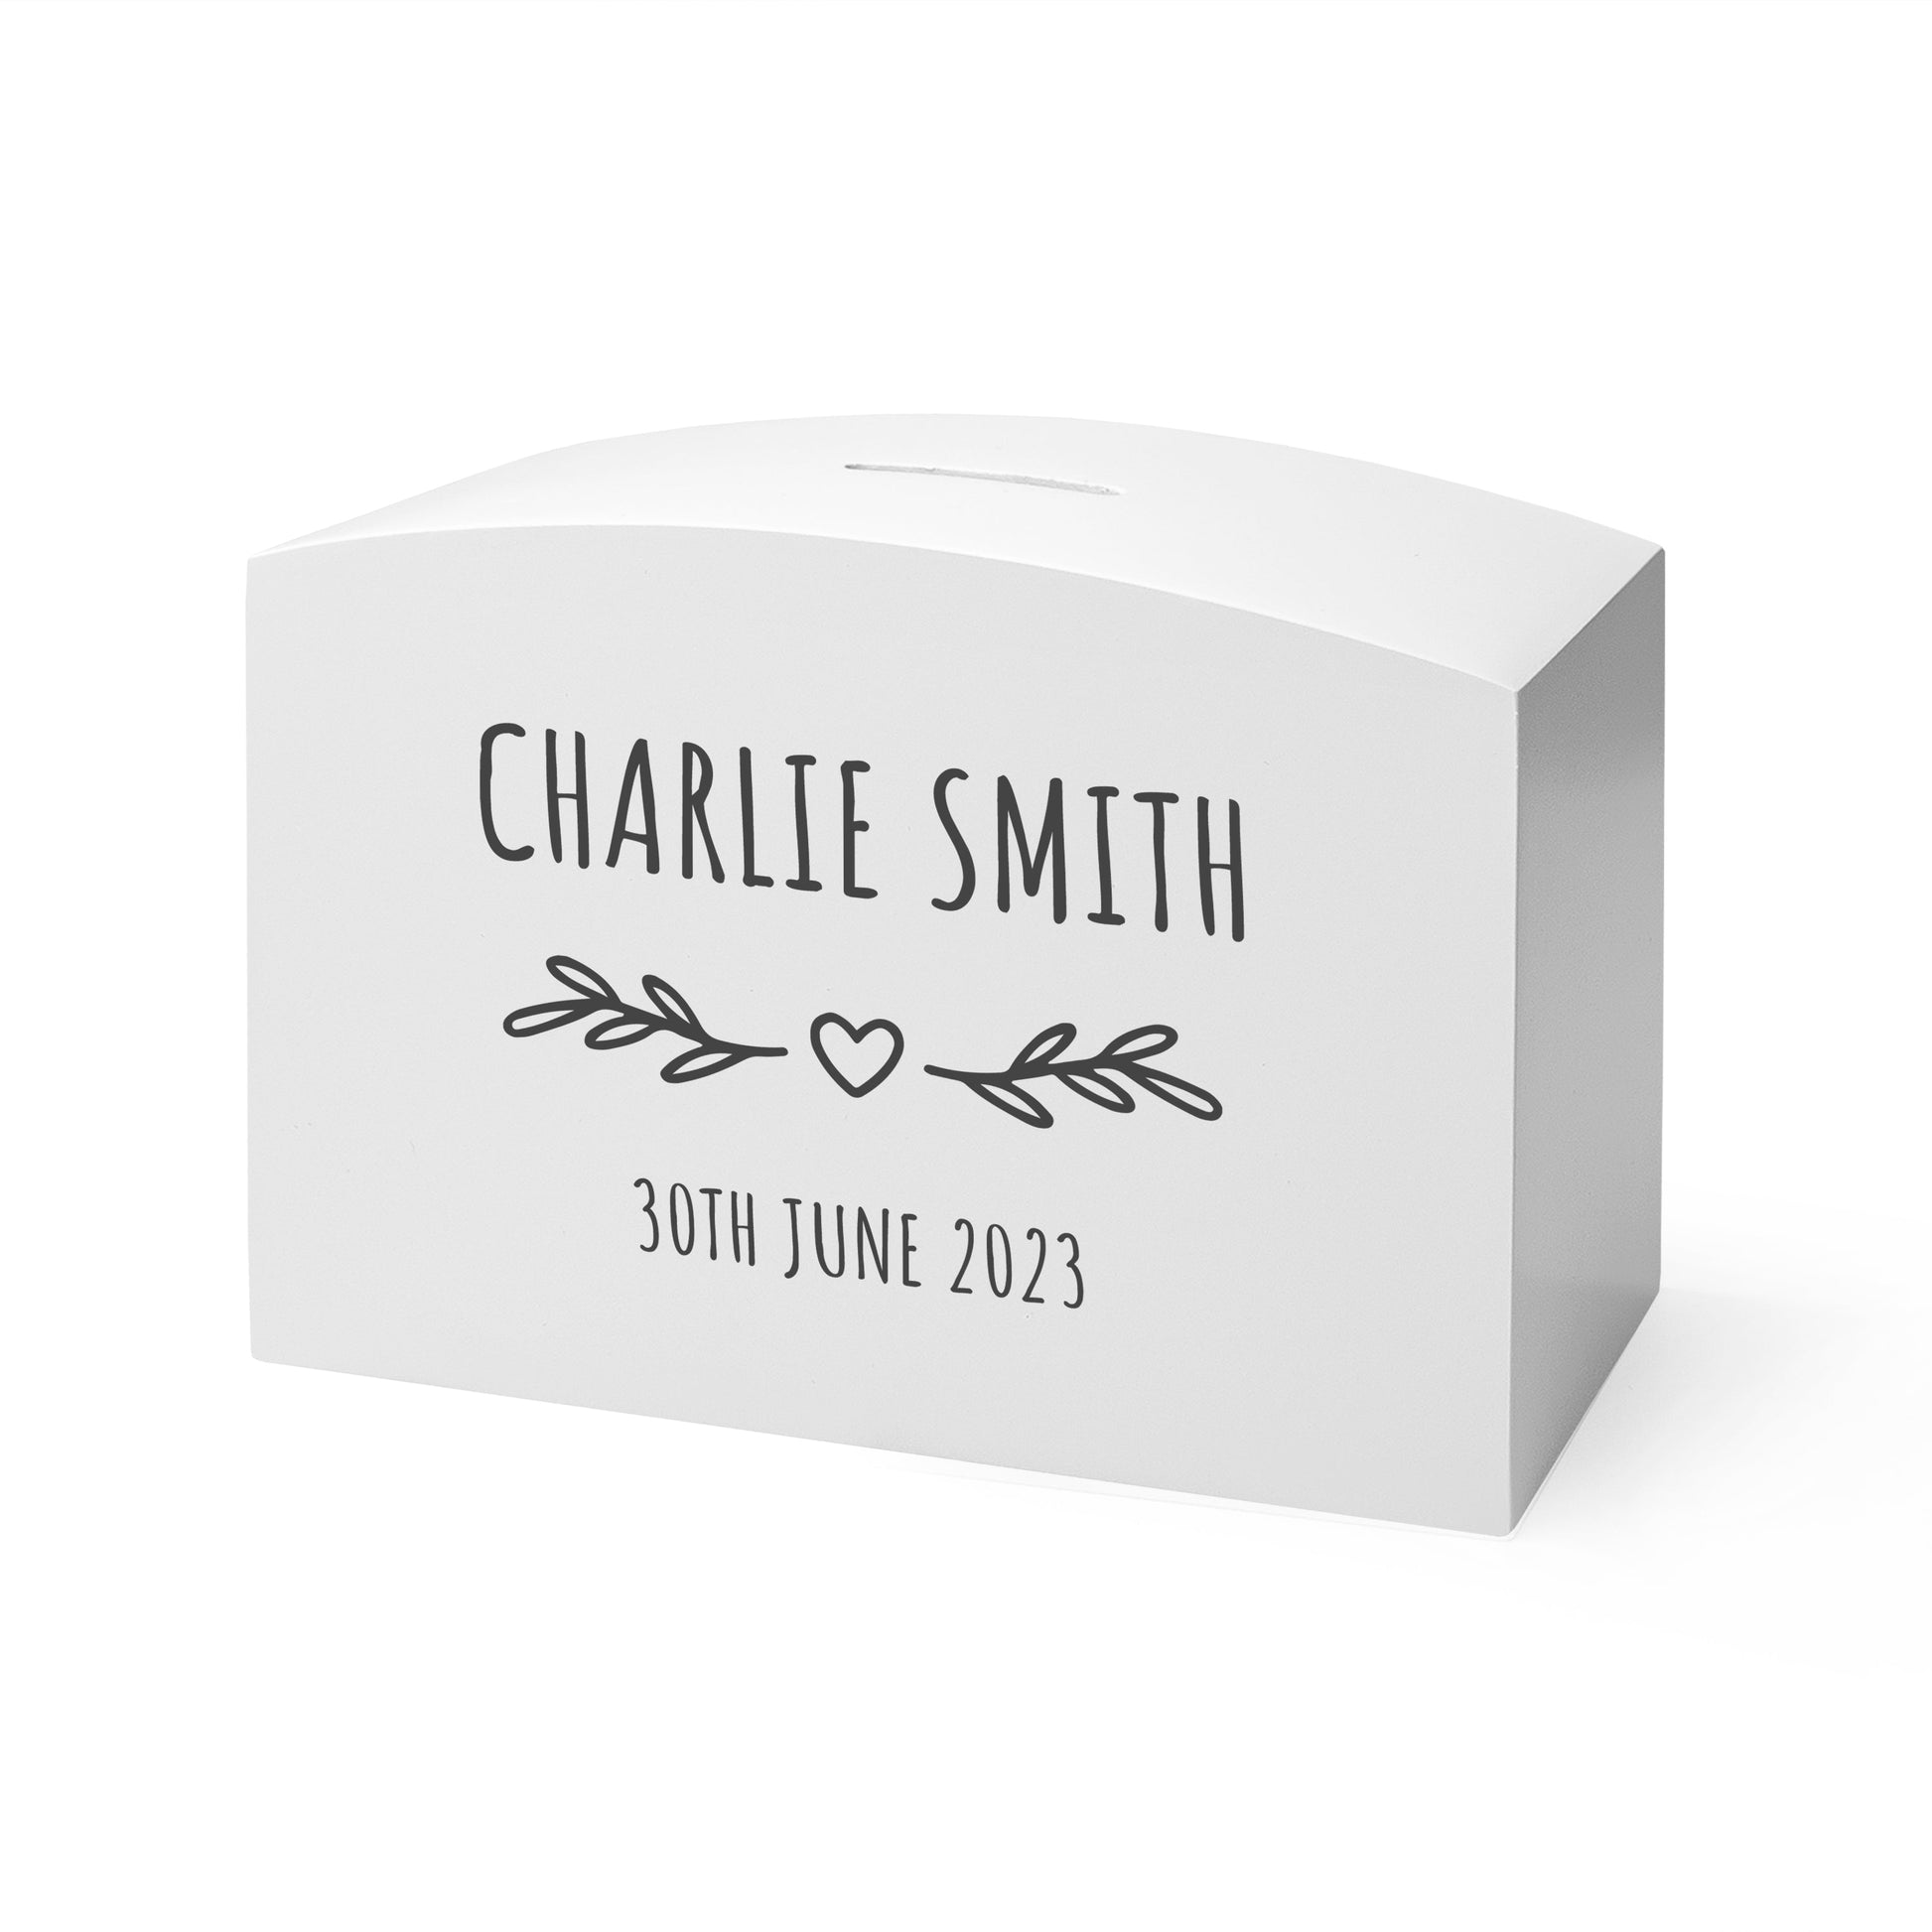 Personalized Money Boxes - Personalized New Baby Money Box 